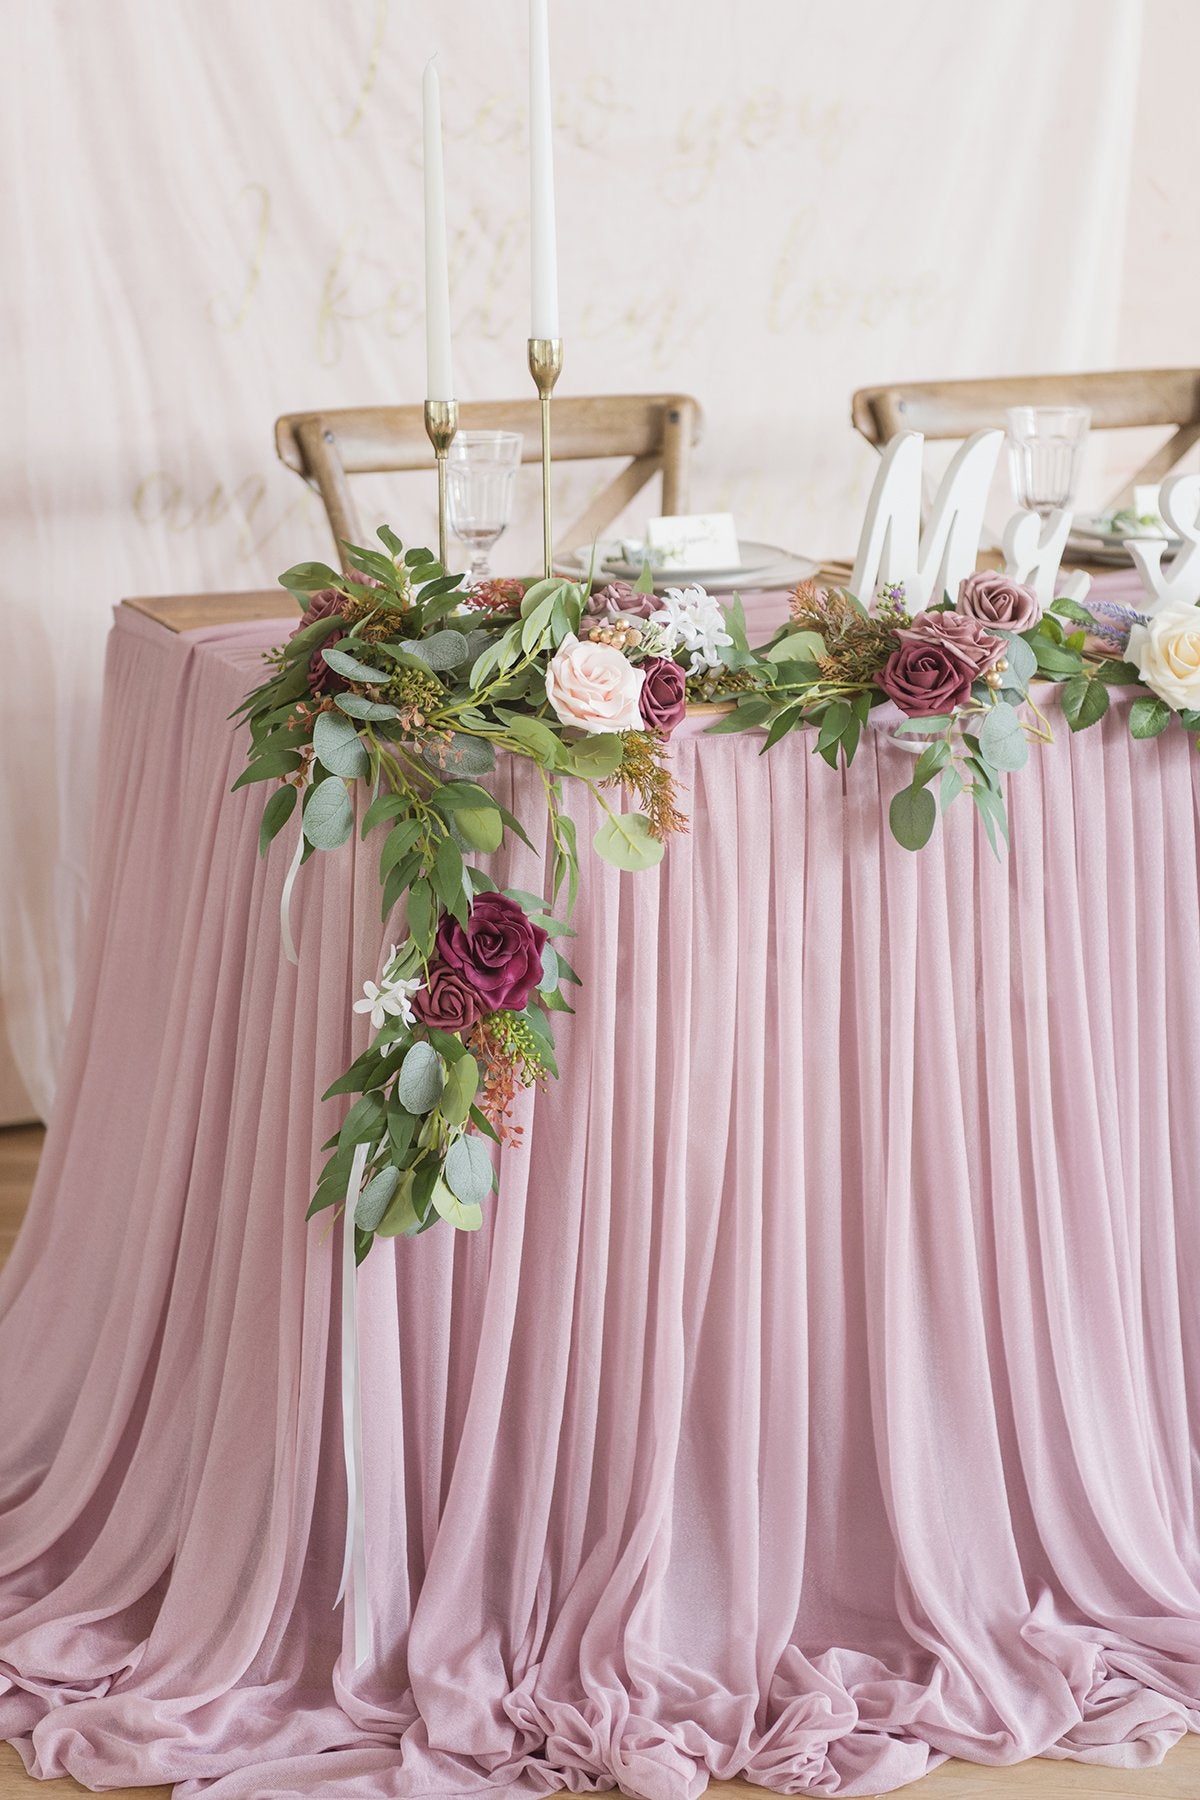 https://www.lingsmoment.com/products/romantic-extra-long-table-skirt?variant=31178327359558